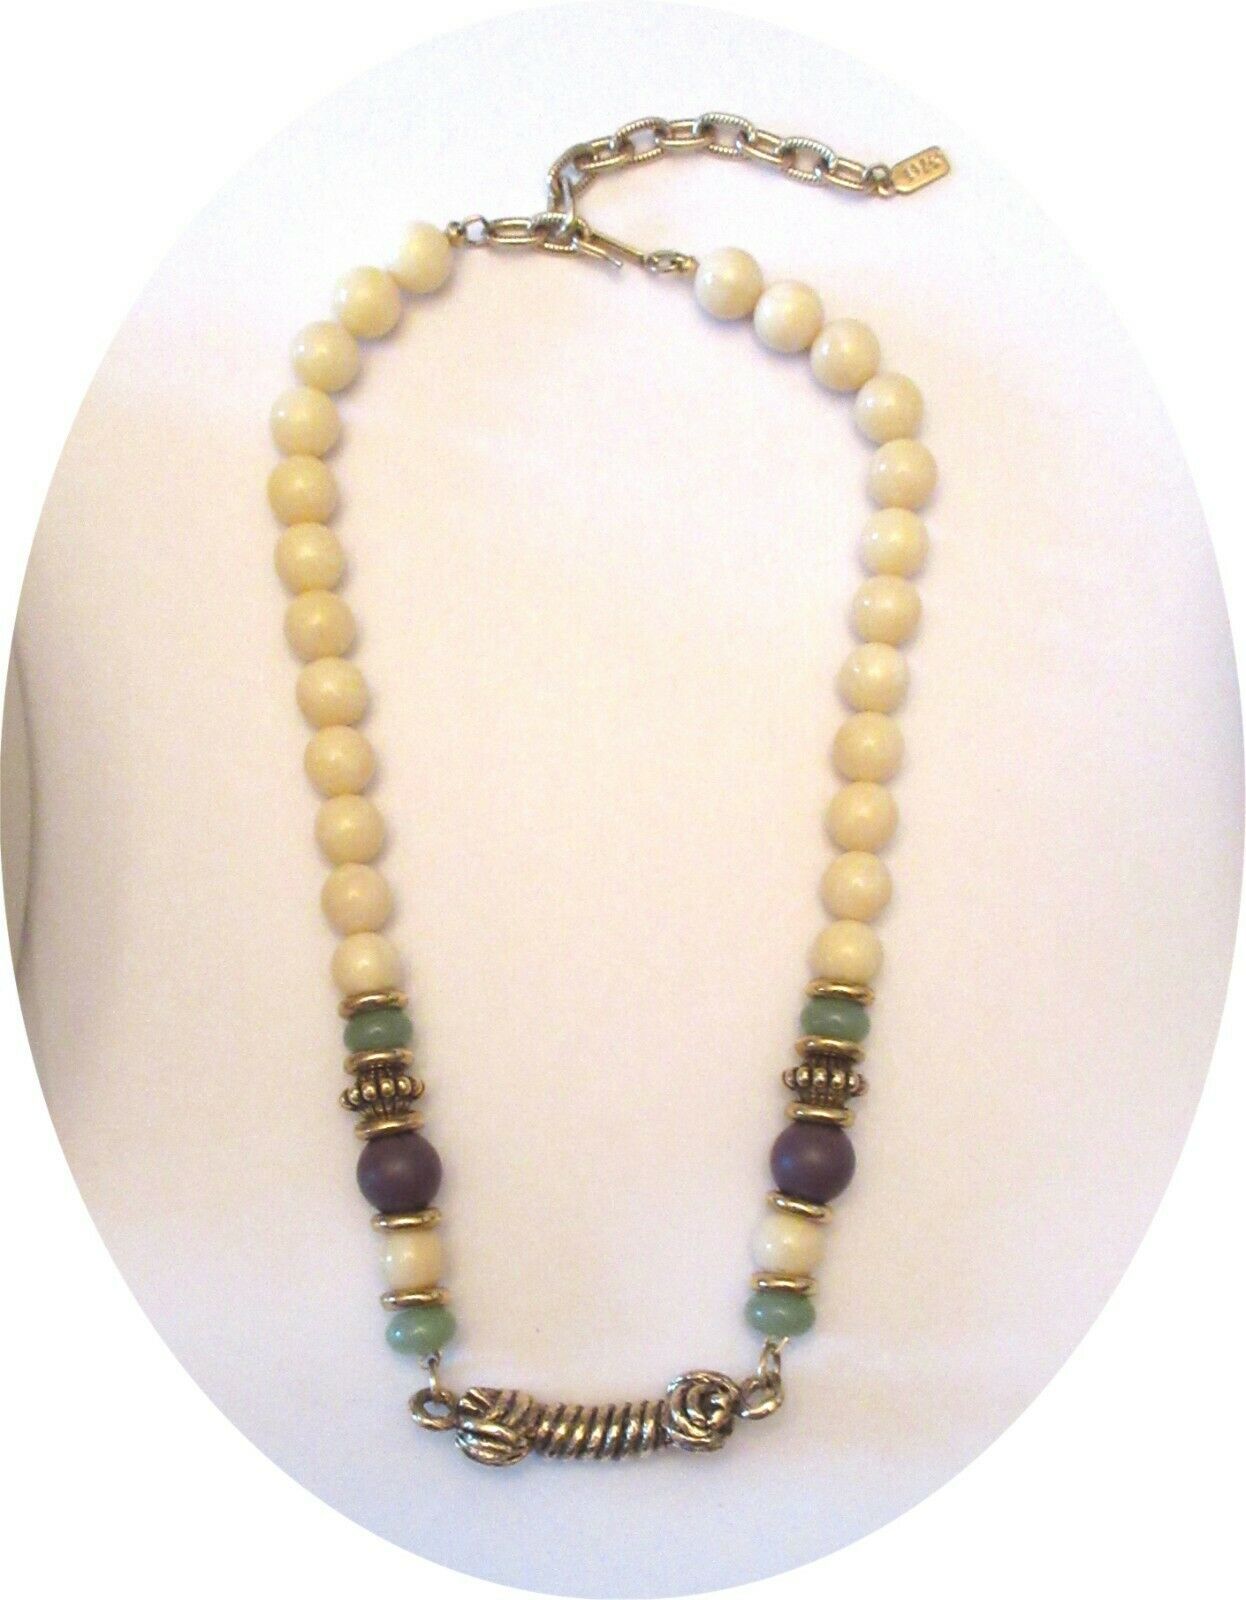 Primary image for Vintage 1928 Faux Pearl 19" Beads Adjustable Necklace Jewelry Goldtone Accents